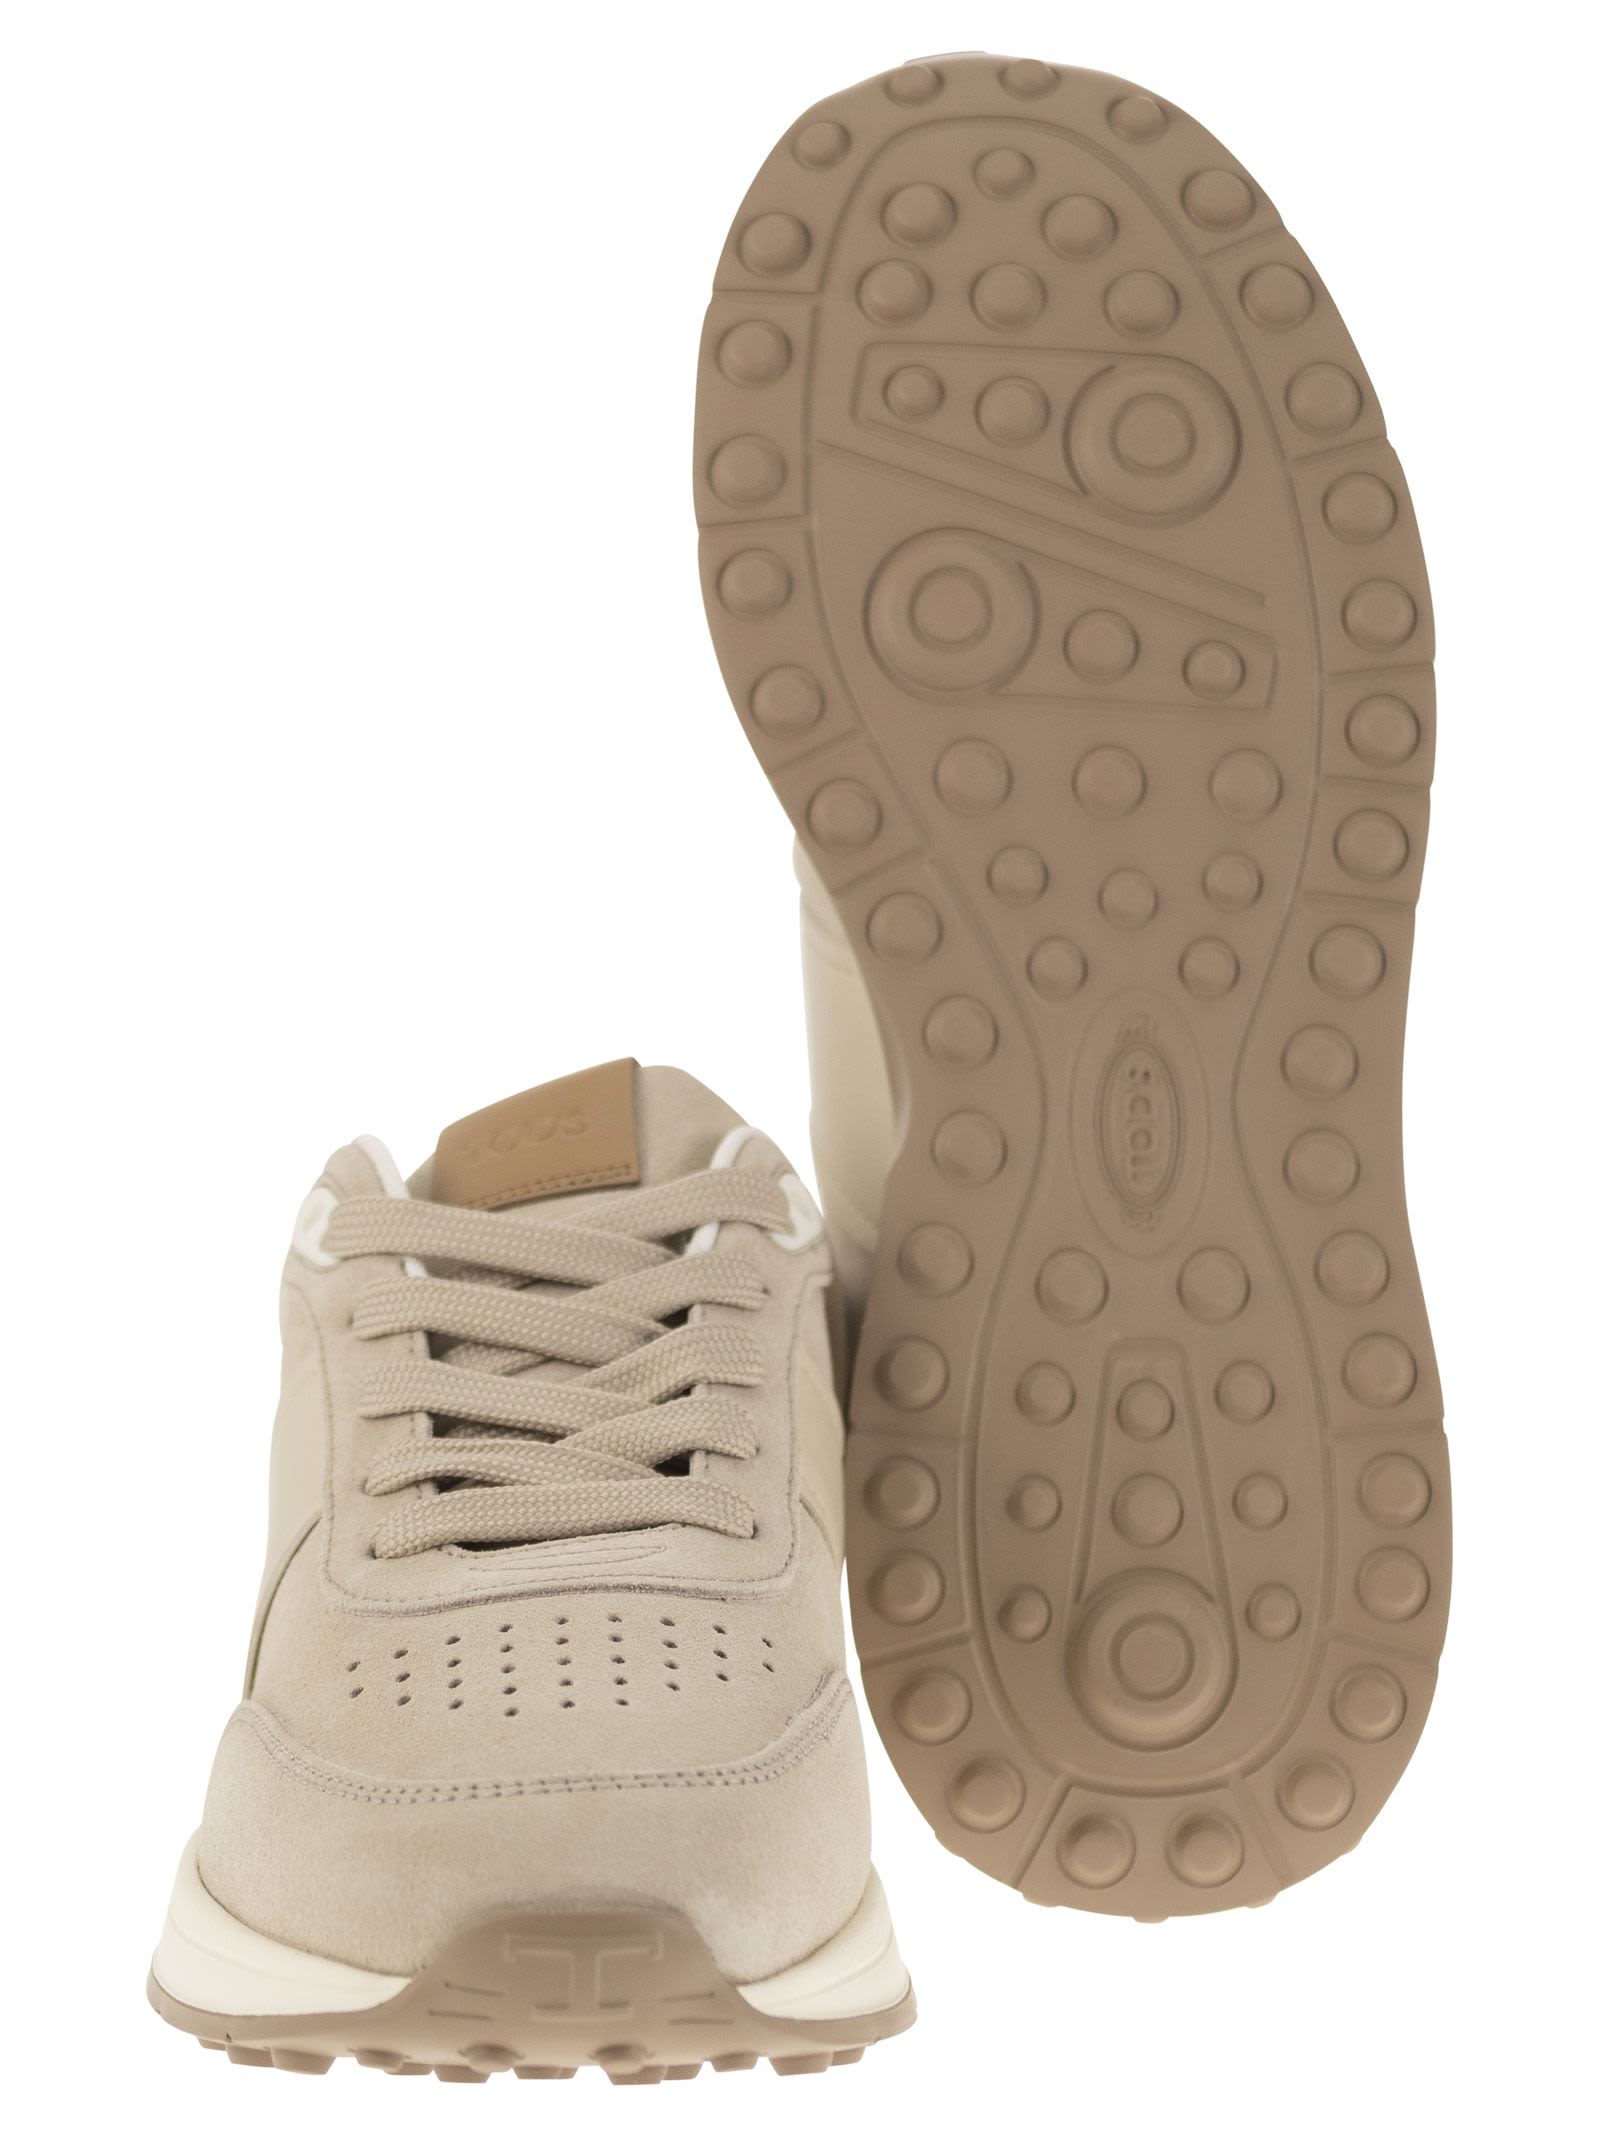 Shop Tod's Suede Leather Sneakers In Grey